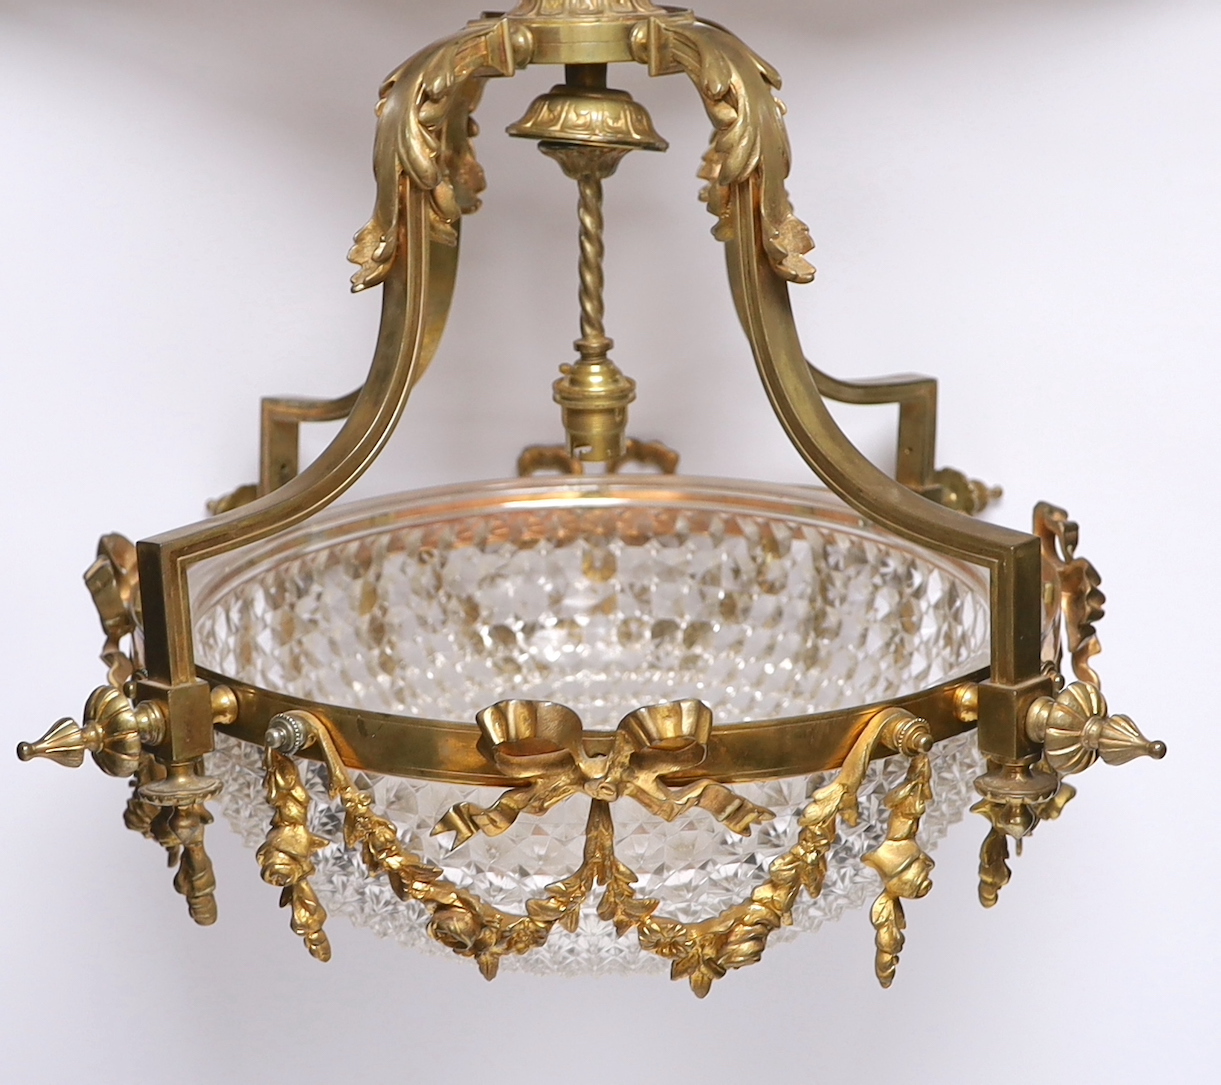 An early 20th century ormolu and hobnail cut glass ceiling shade, 43cm drop